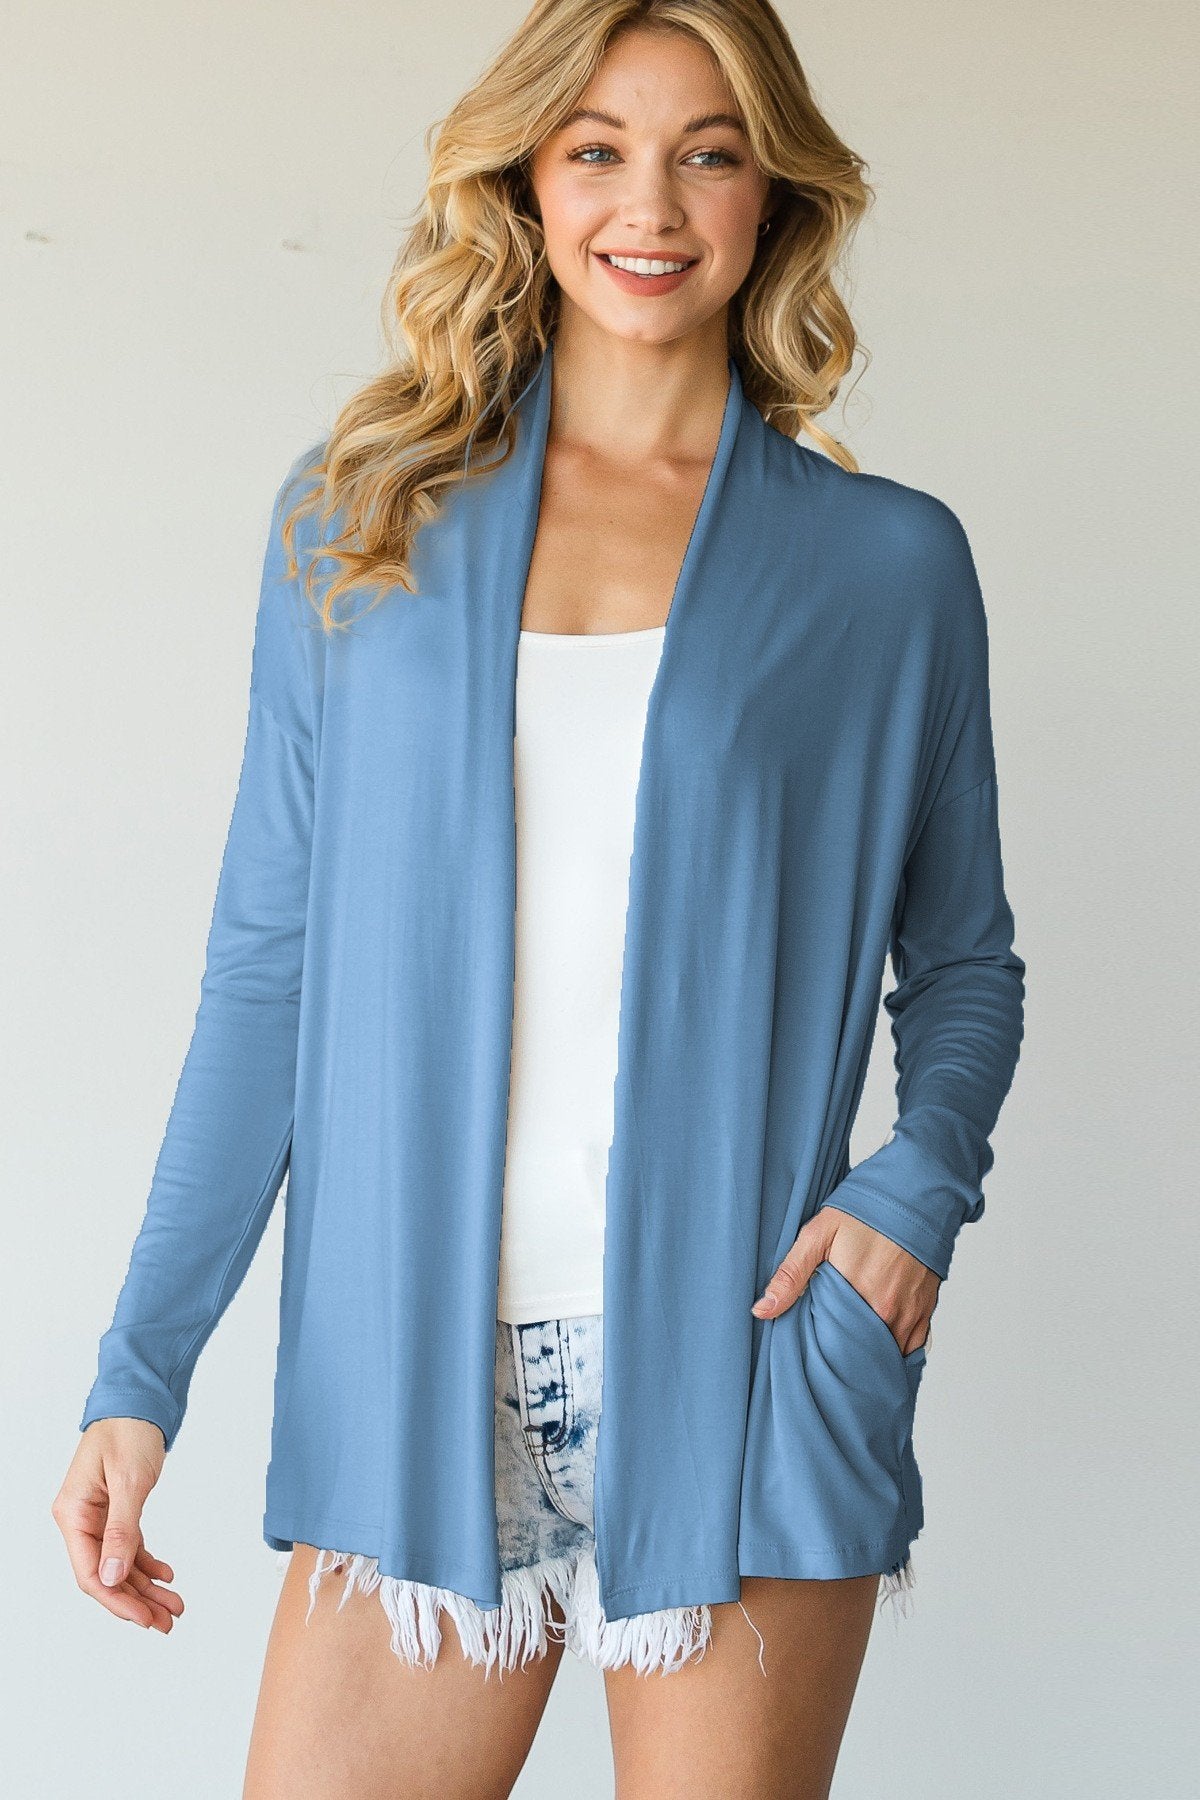 Casual Cardigan Featuring Collar And Side Pockets - Tigbul's Fashion